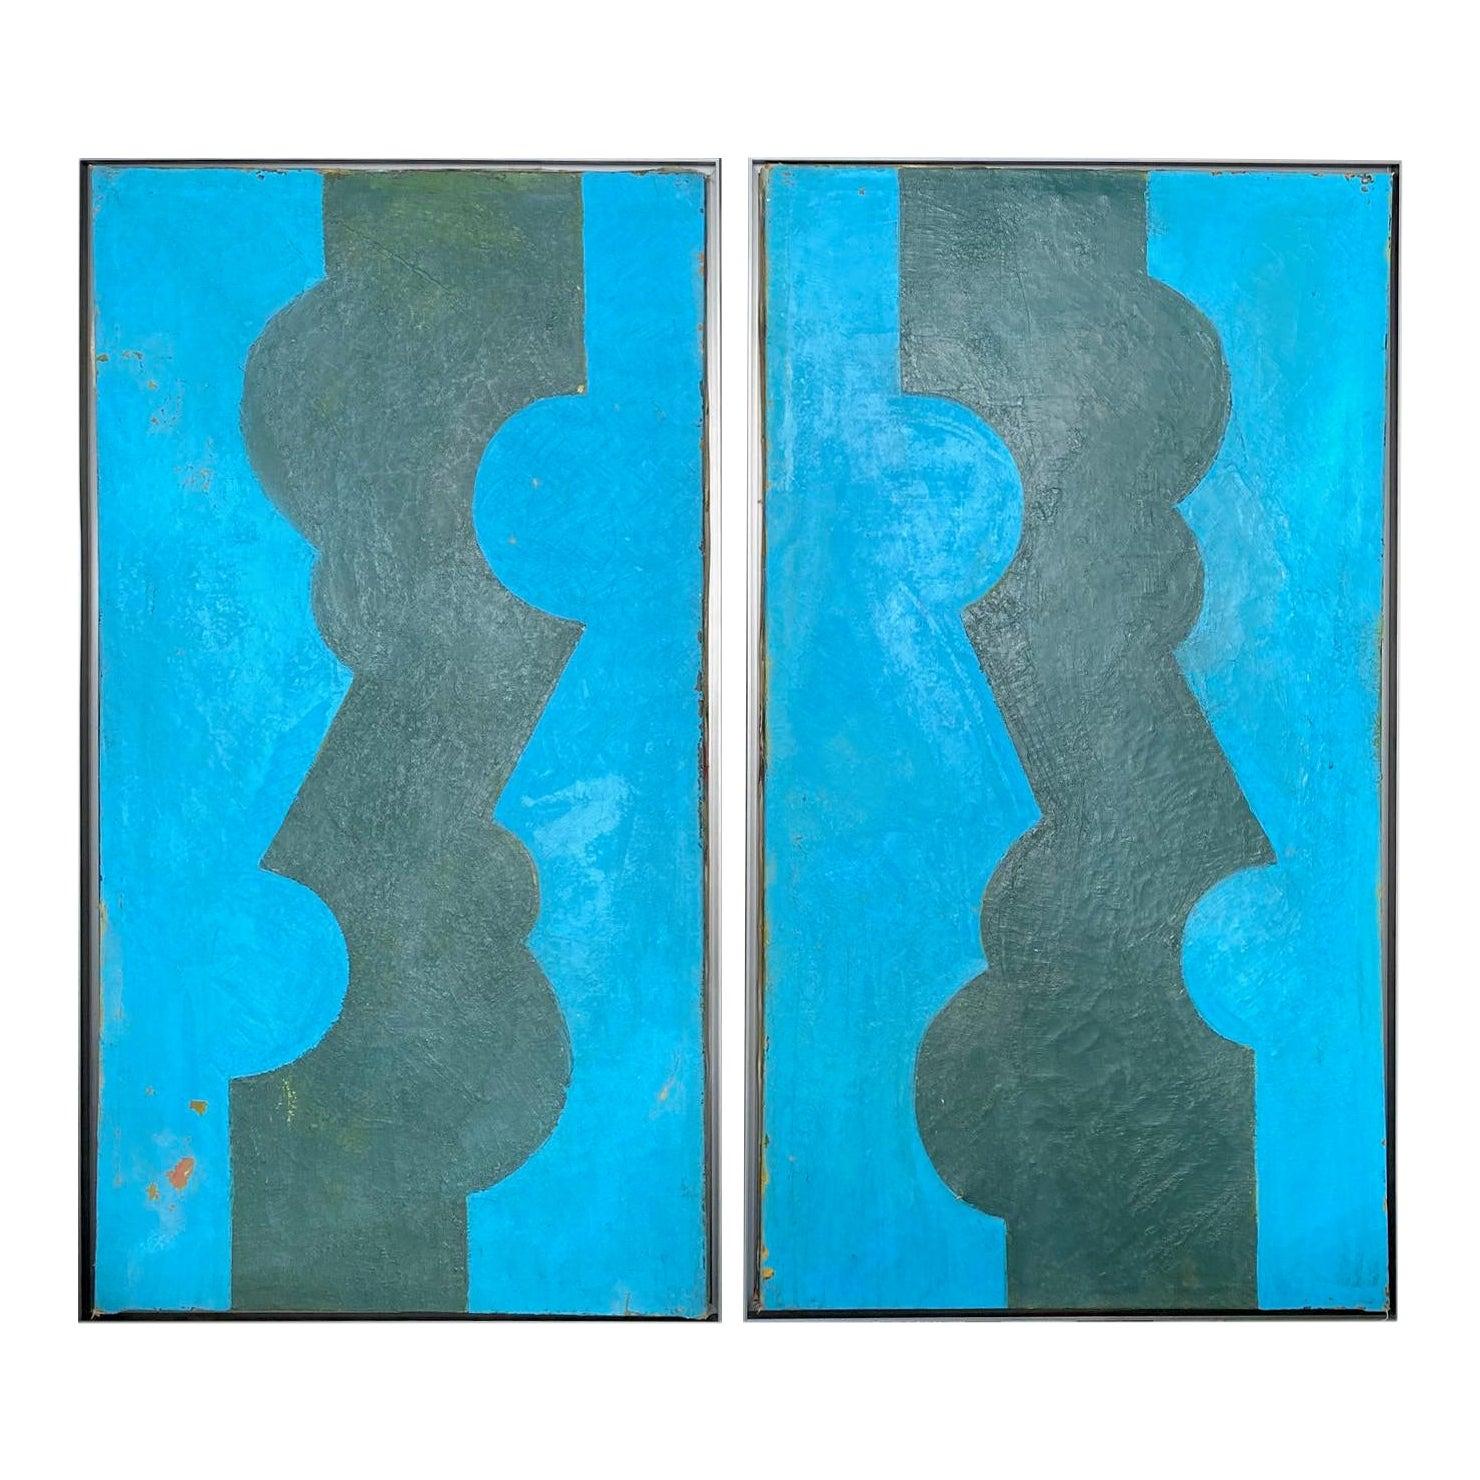 Modern Contemporary Geometric Blue and Green "Untitled" Paintings by Oscar Muril For Sale